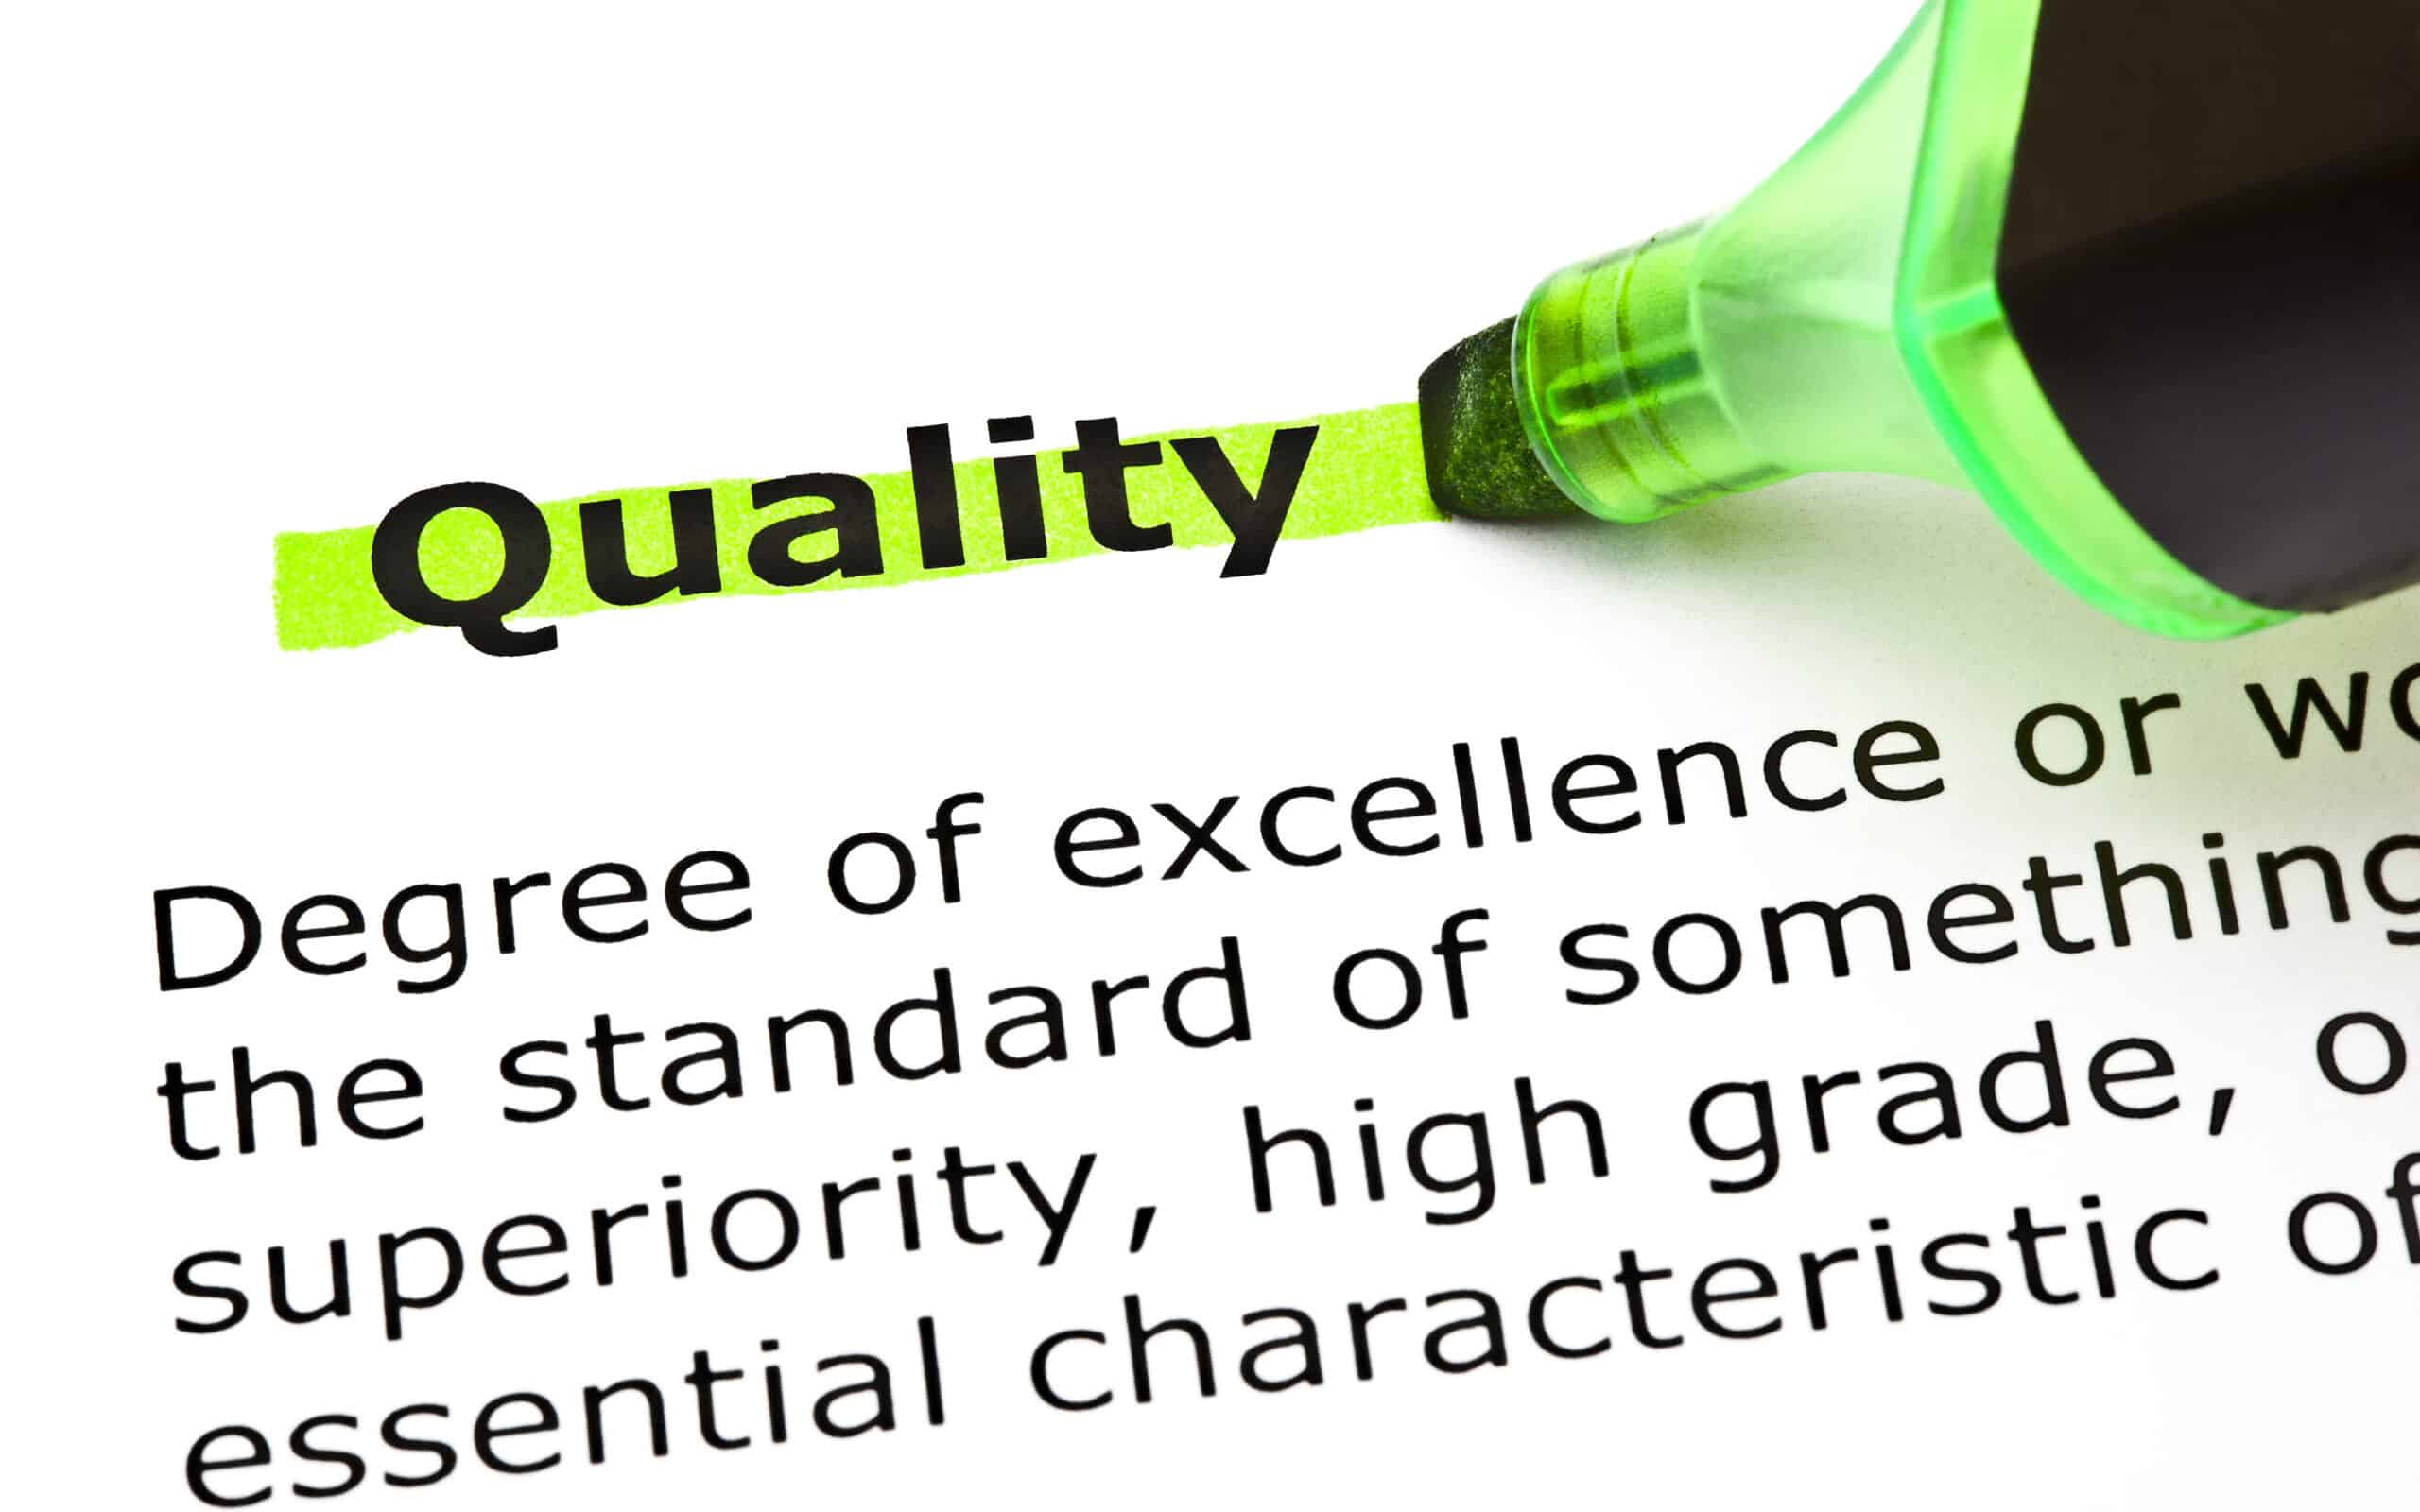 How To Tell The Difference Between Poor Quality and High Quality